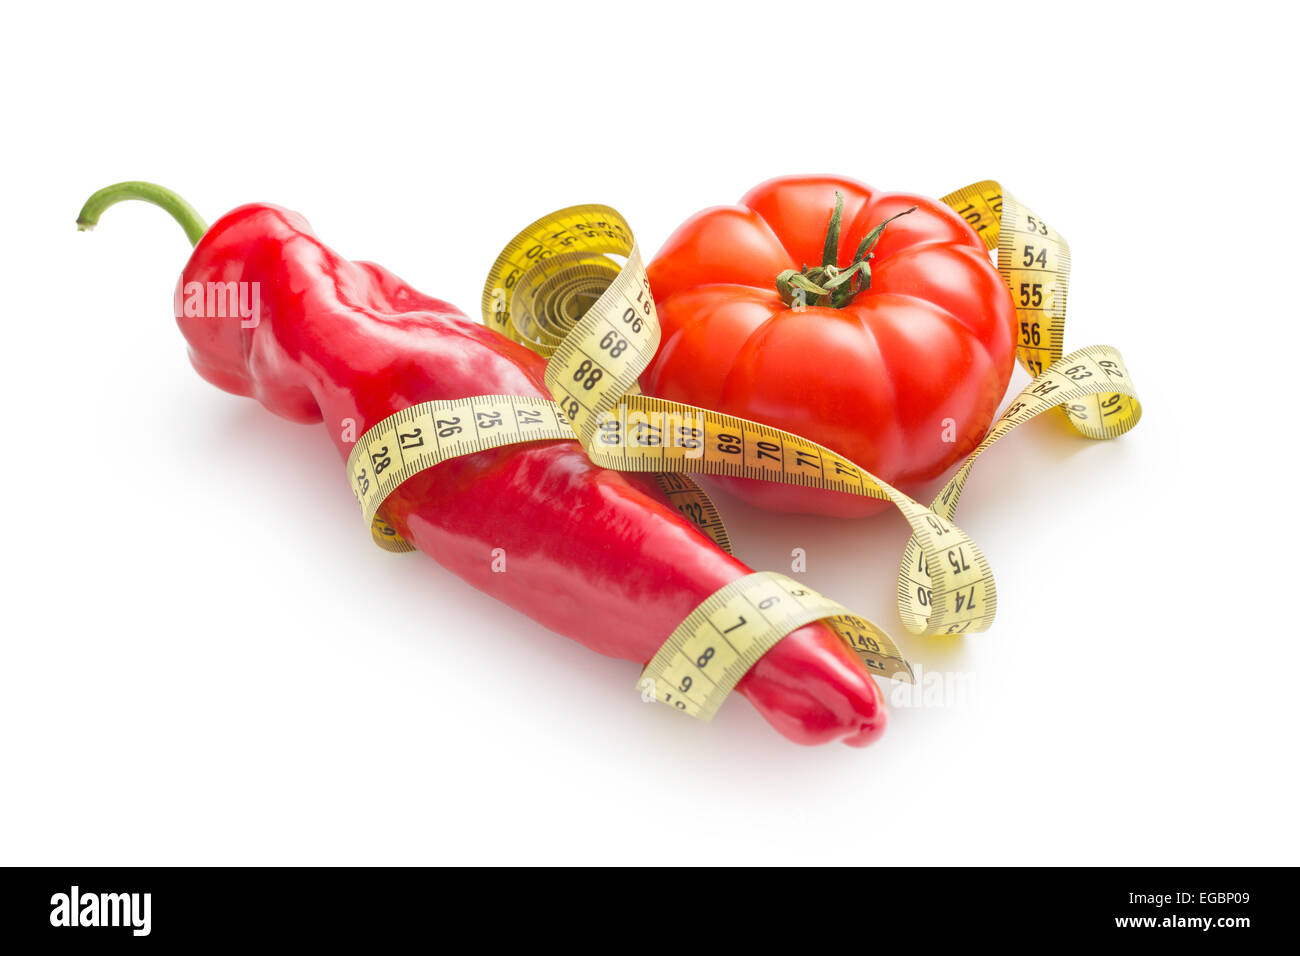 Diet concept. Pepper and tomato on white background. Stock Photo